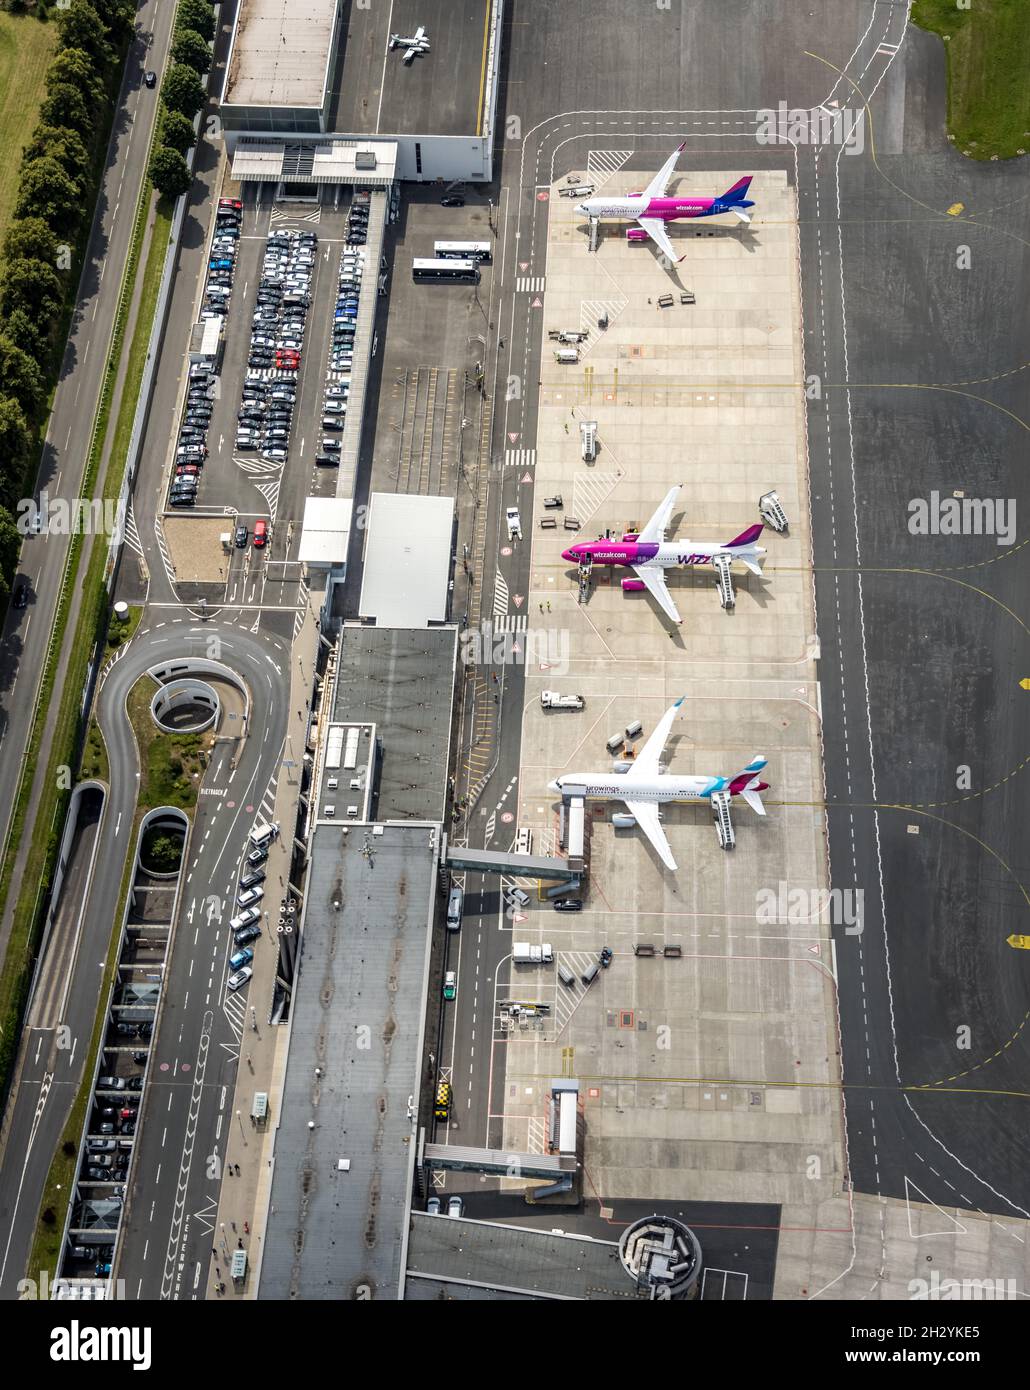 Aerial photo, Dortmund Airport, EDLW, Wickede, apron with two jets of Wizzair and one Eurowings plane, Dortmund, Ruhr Area, North Rhine-Westphalia, Ge Stock Photo